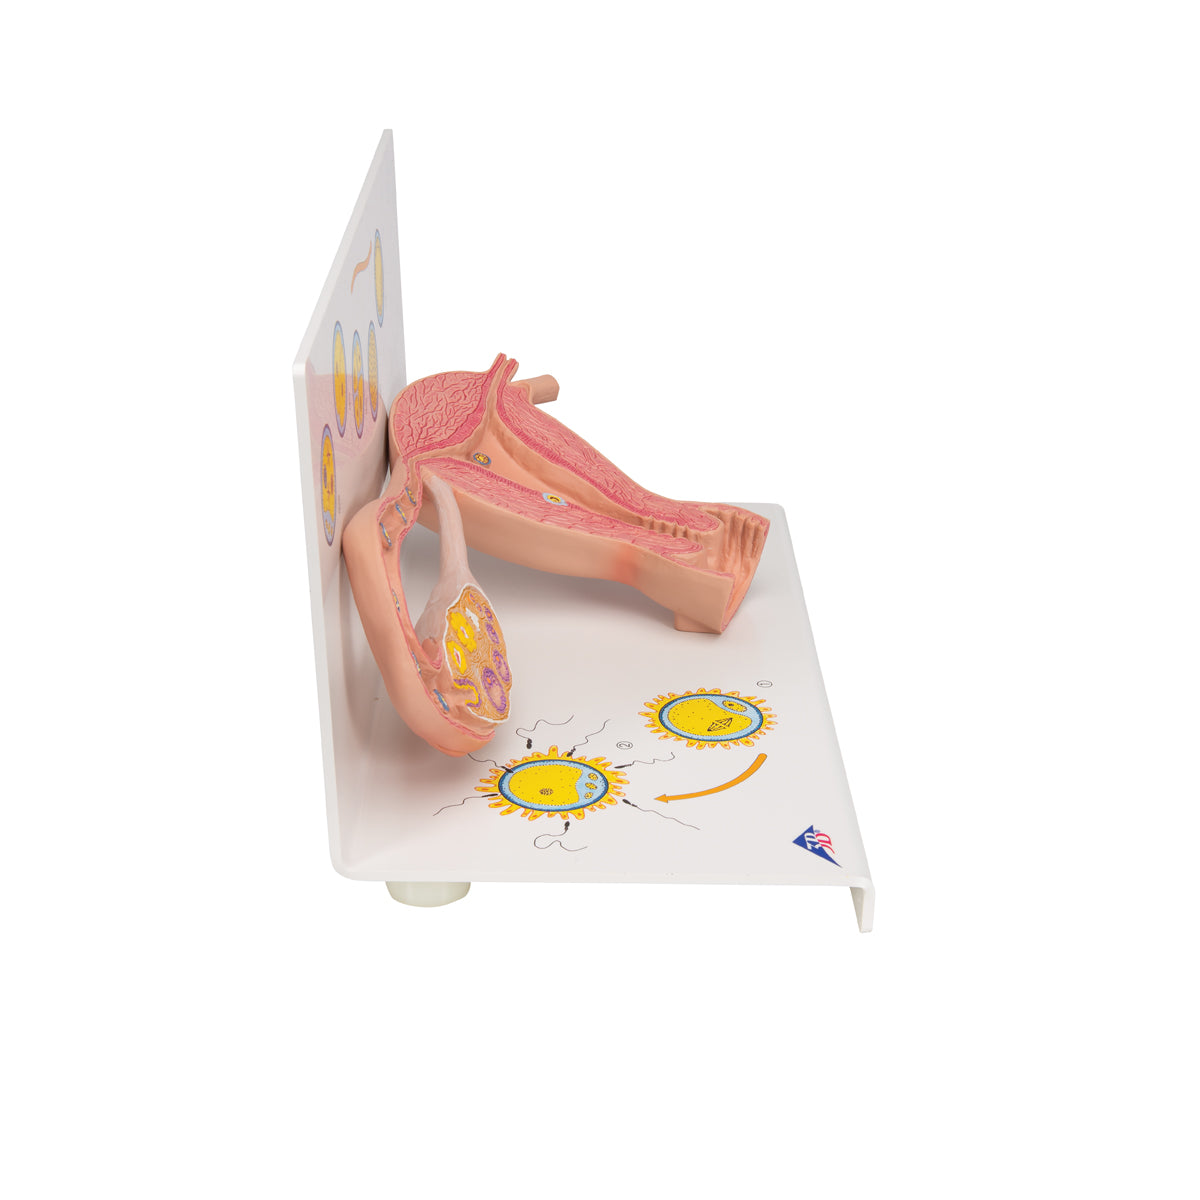 Educational model showing ovulation, fertilization and implantation in the uterus